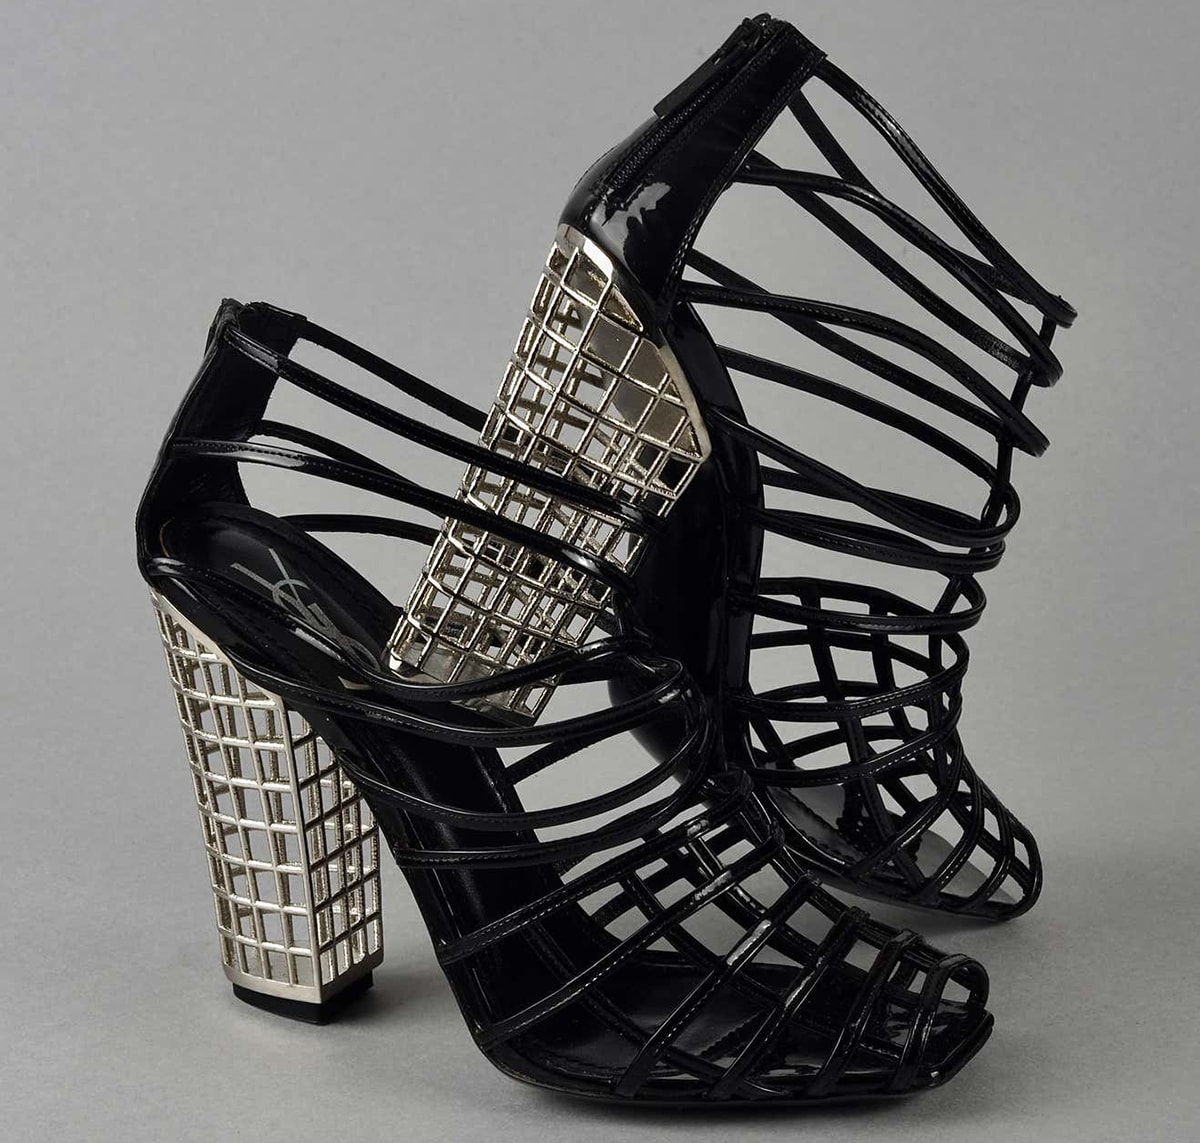 YSL's caged booties from the Spring/Summer 2009 collection started the cage heel trend